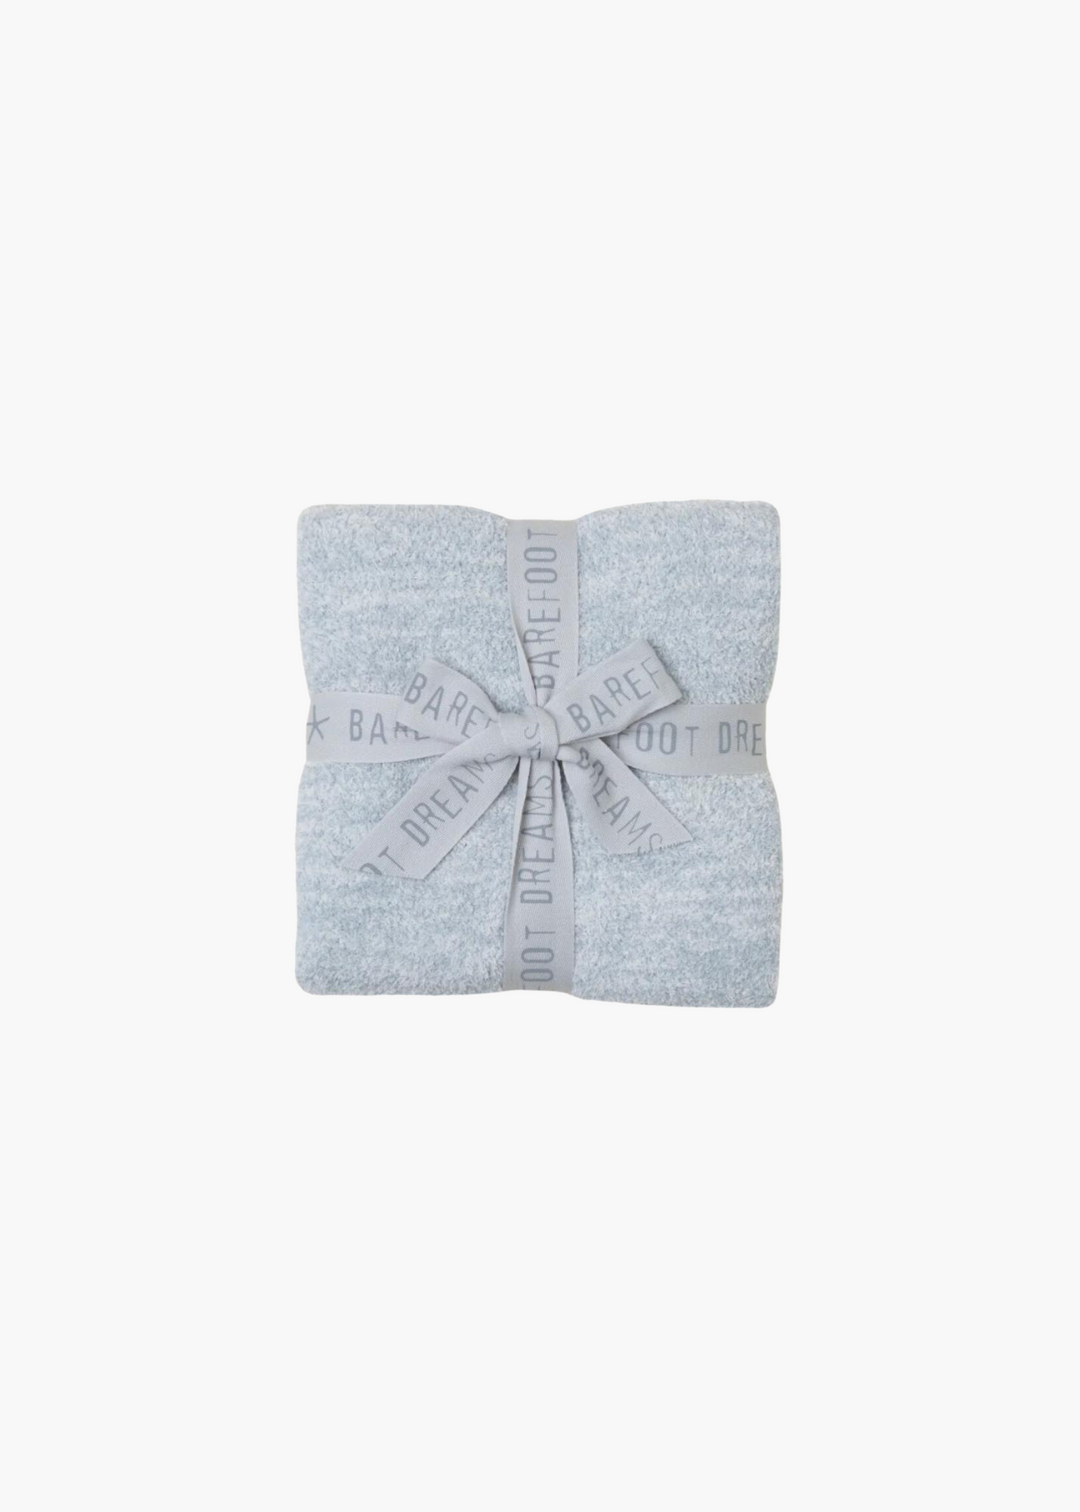 CozyChic® Ombre Baby Blanket